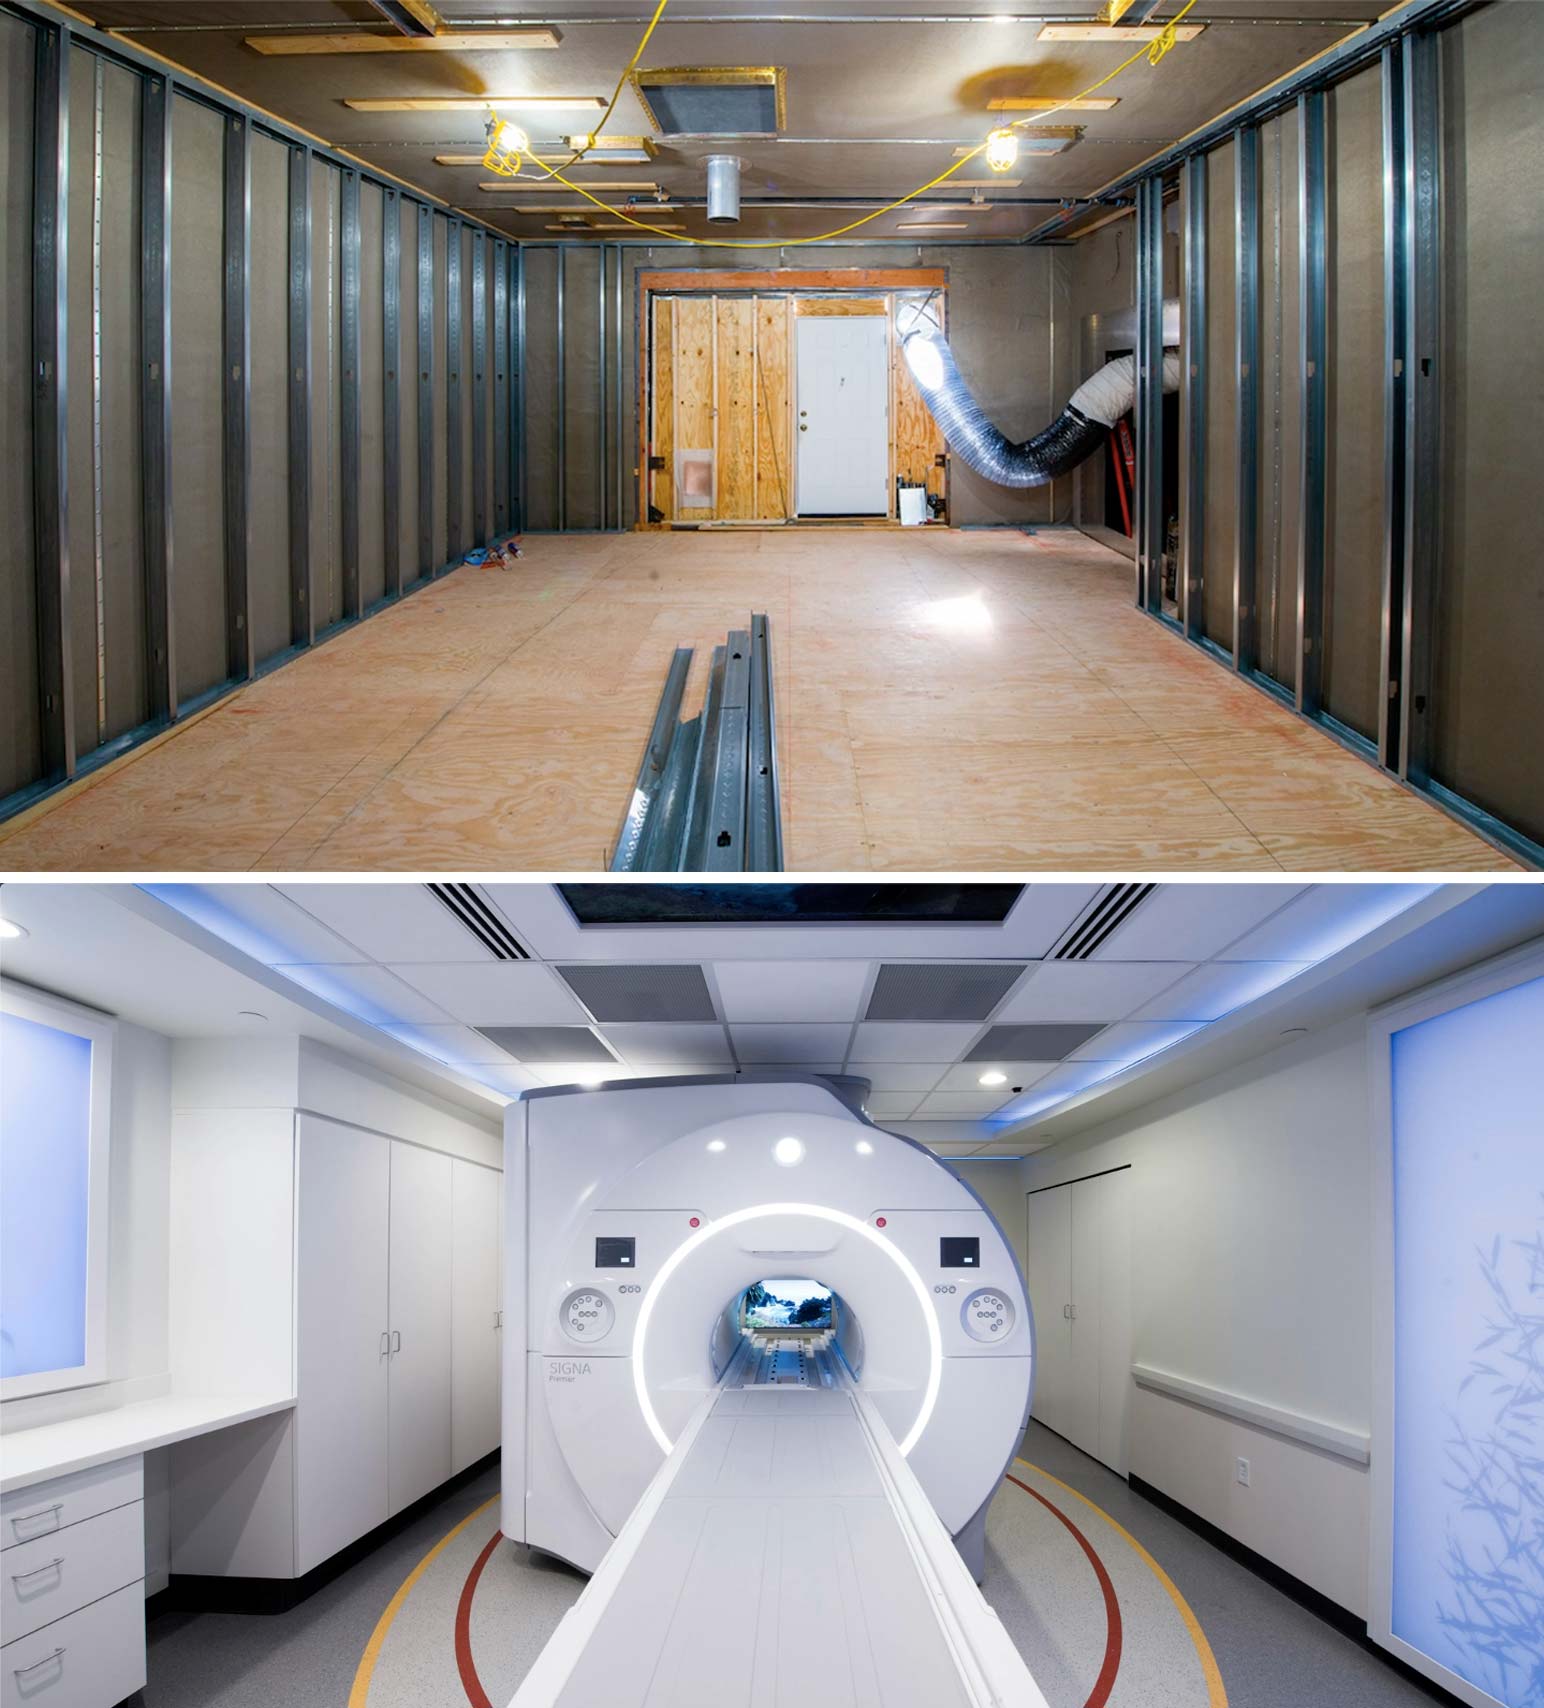 PDC NiCuFlex MRI RF Shielding with Caring MR Suite® new MRI patient experience project